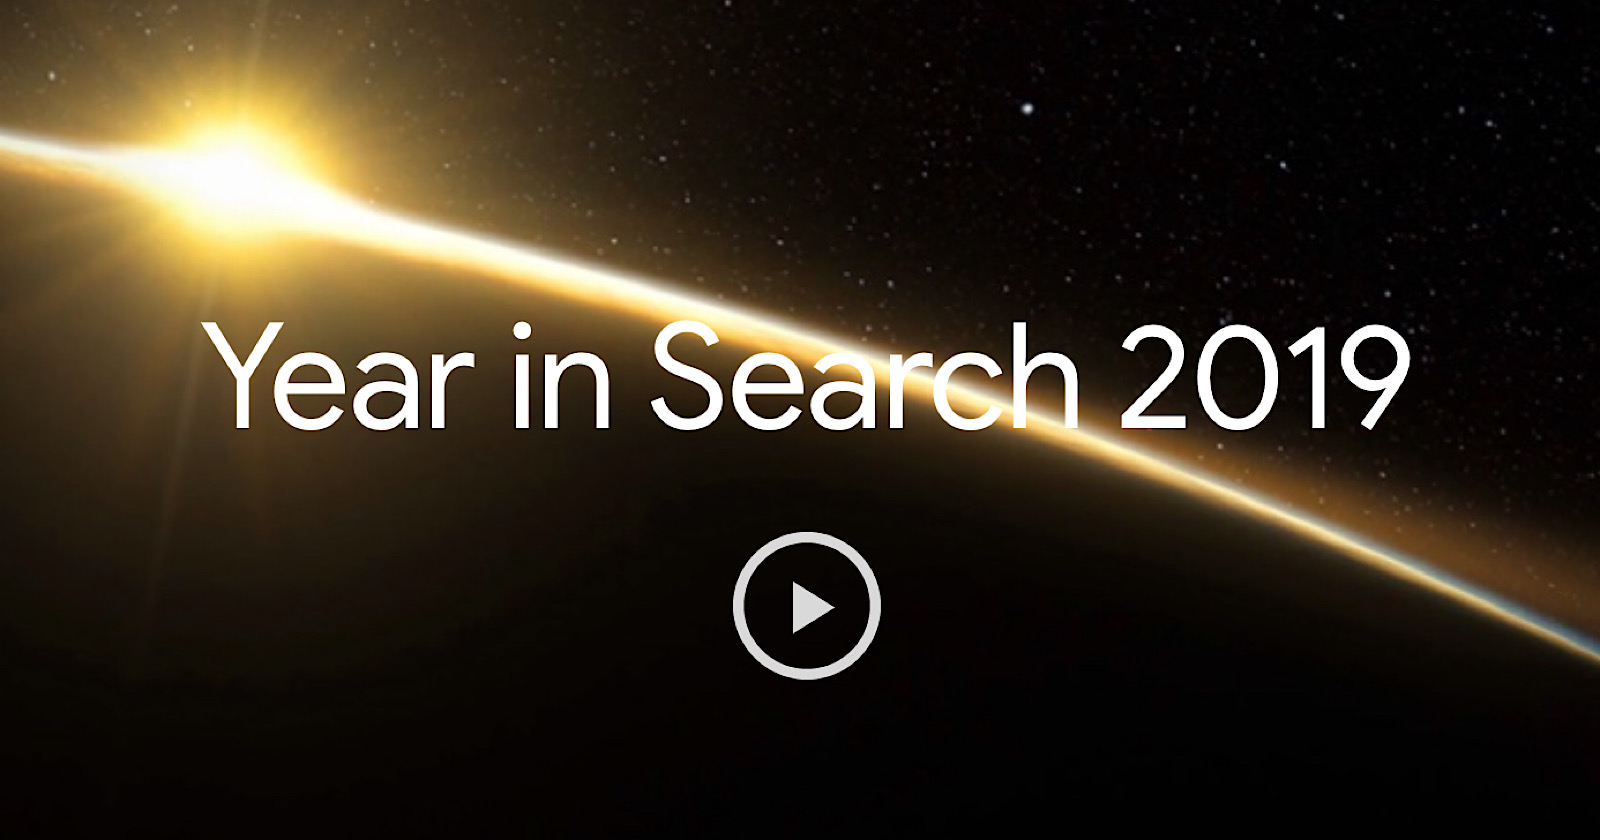 google reveals top trending searches of 2019 via mattgsouthern